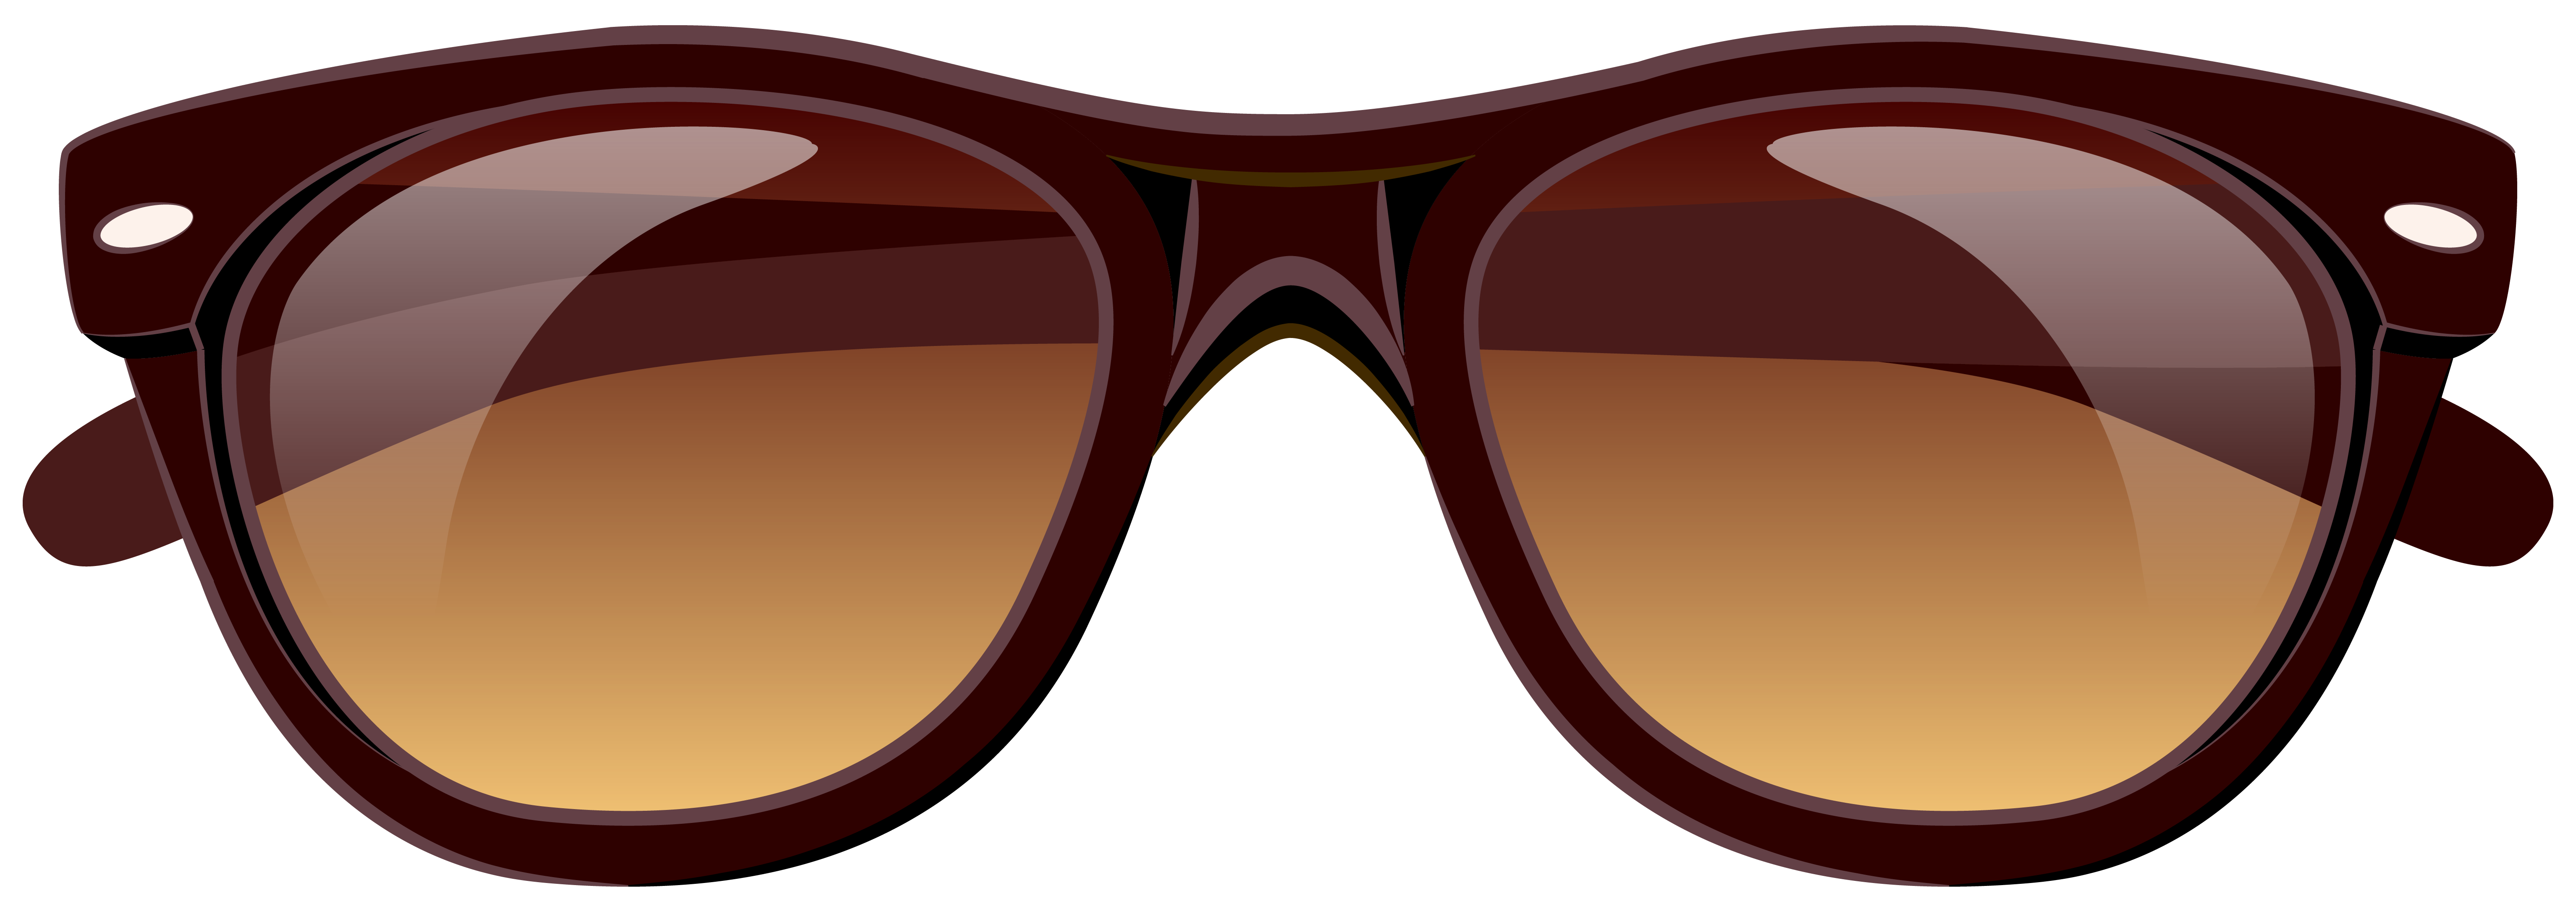 Goggles clipart sunglass. Brown sunglasses png picture